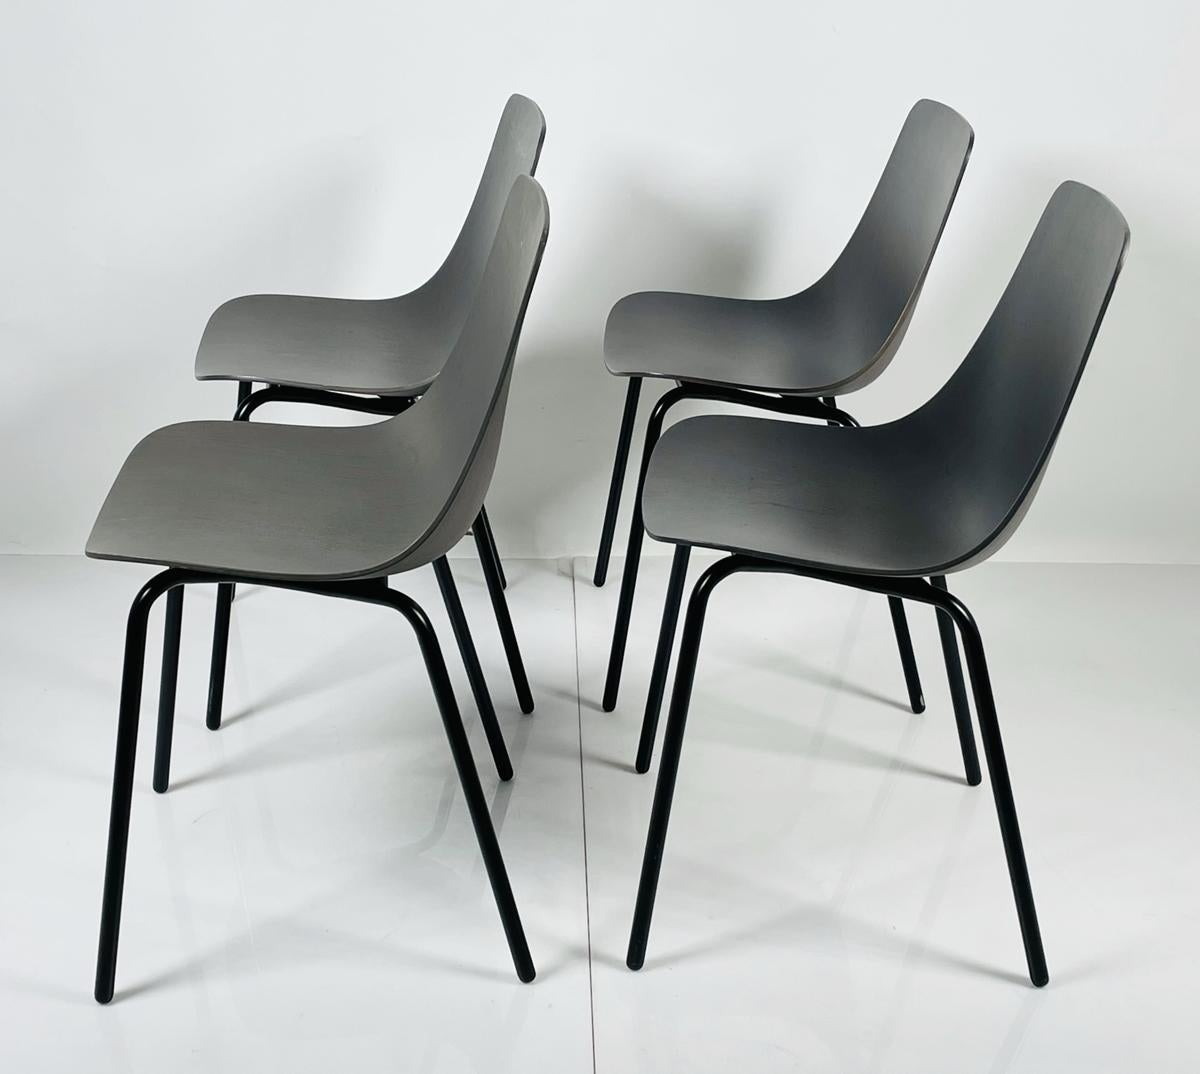 Set of Four Modern Chairs with Molded Seats and Black Metal Frames In Fair Condition For Sale In Los Angeles, CA